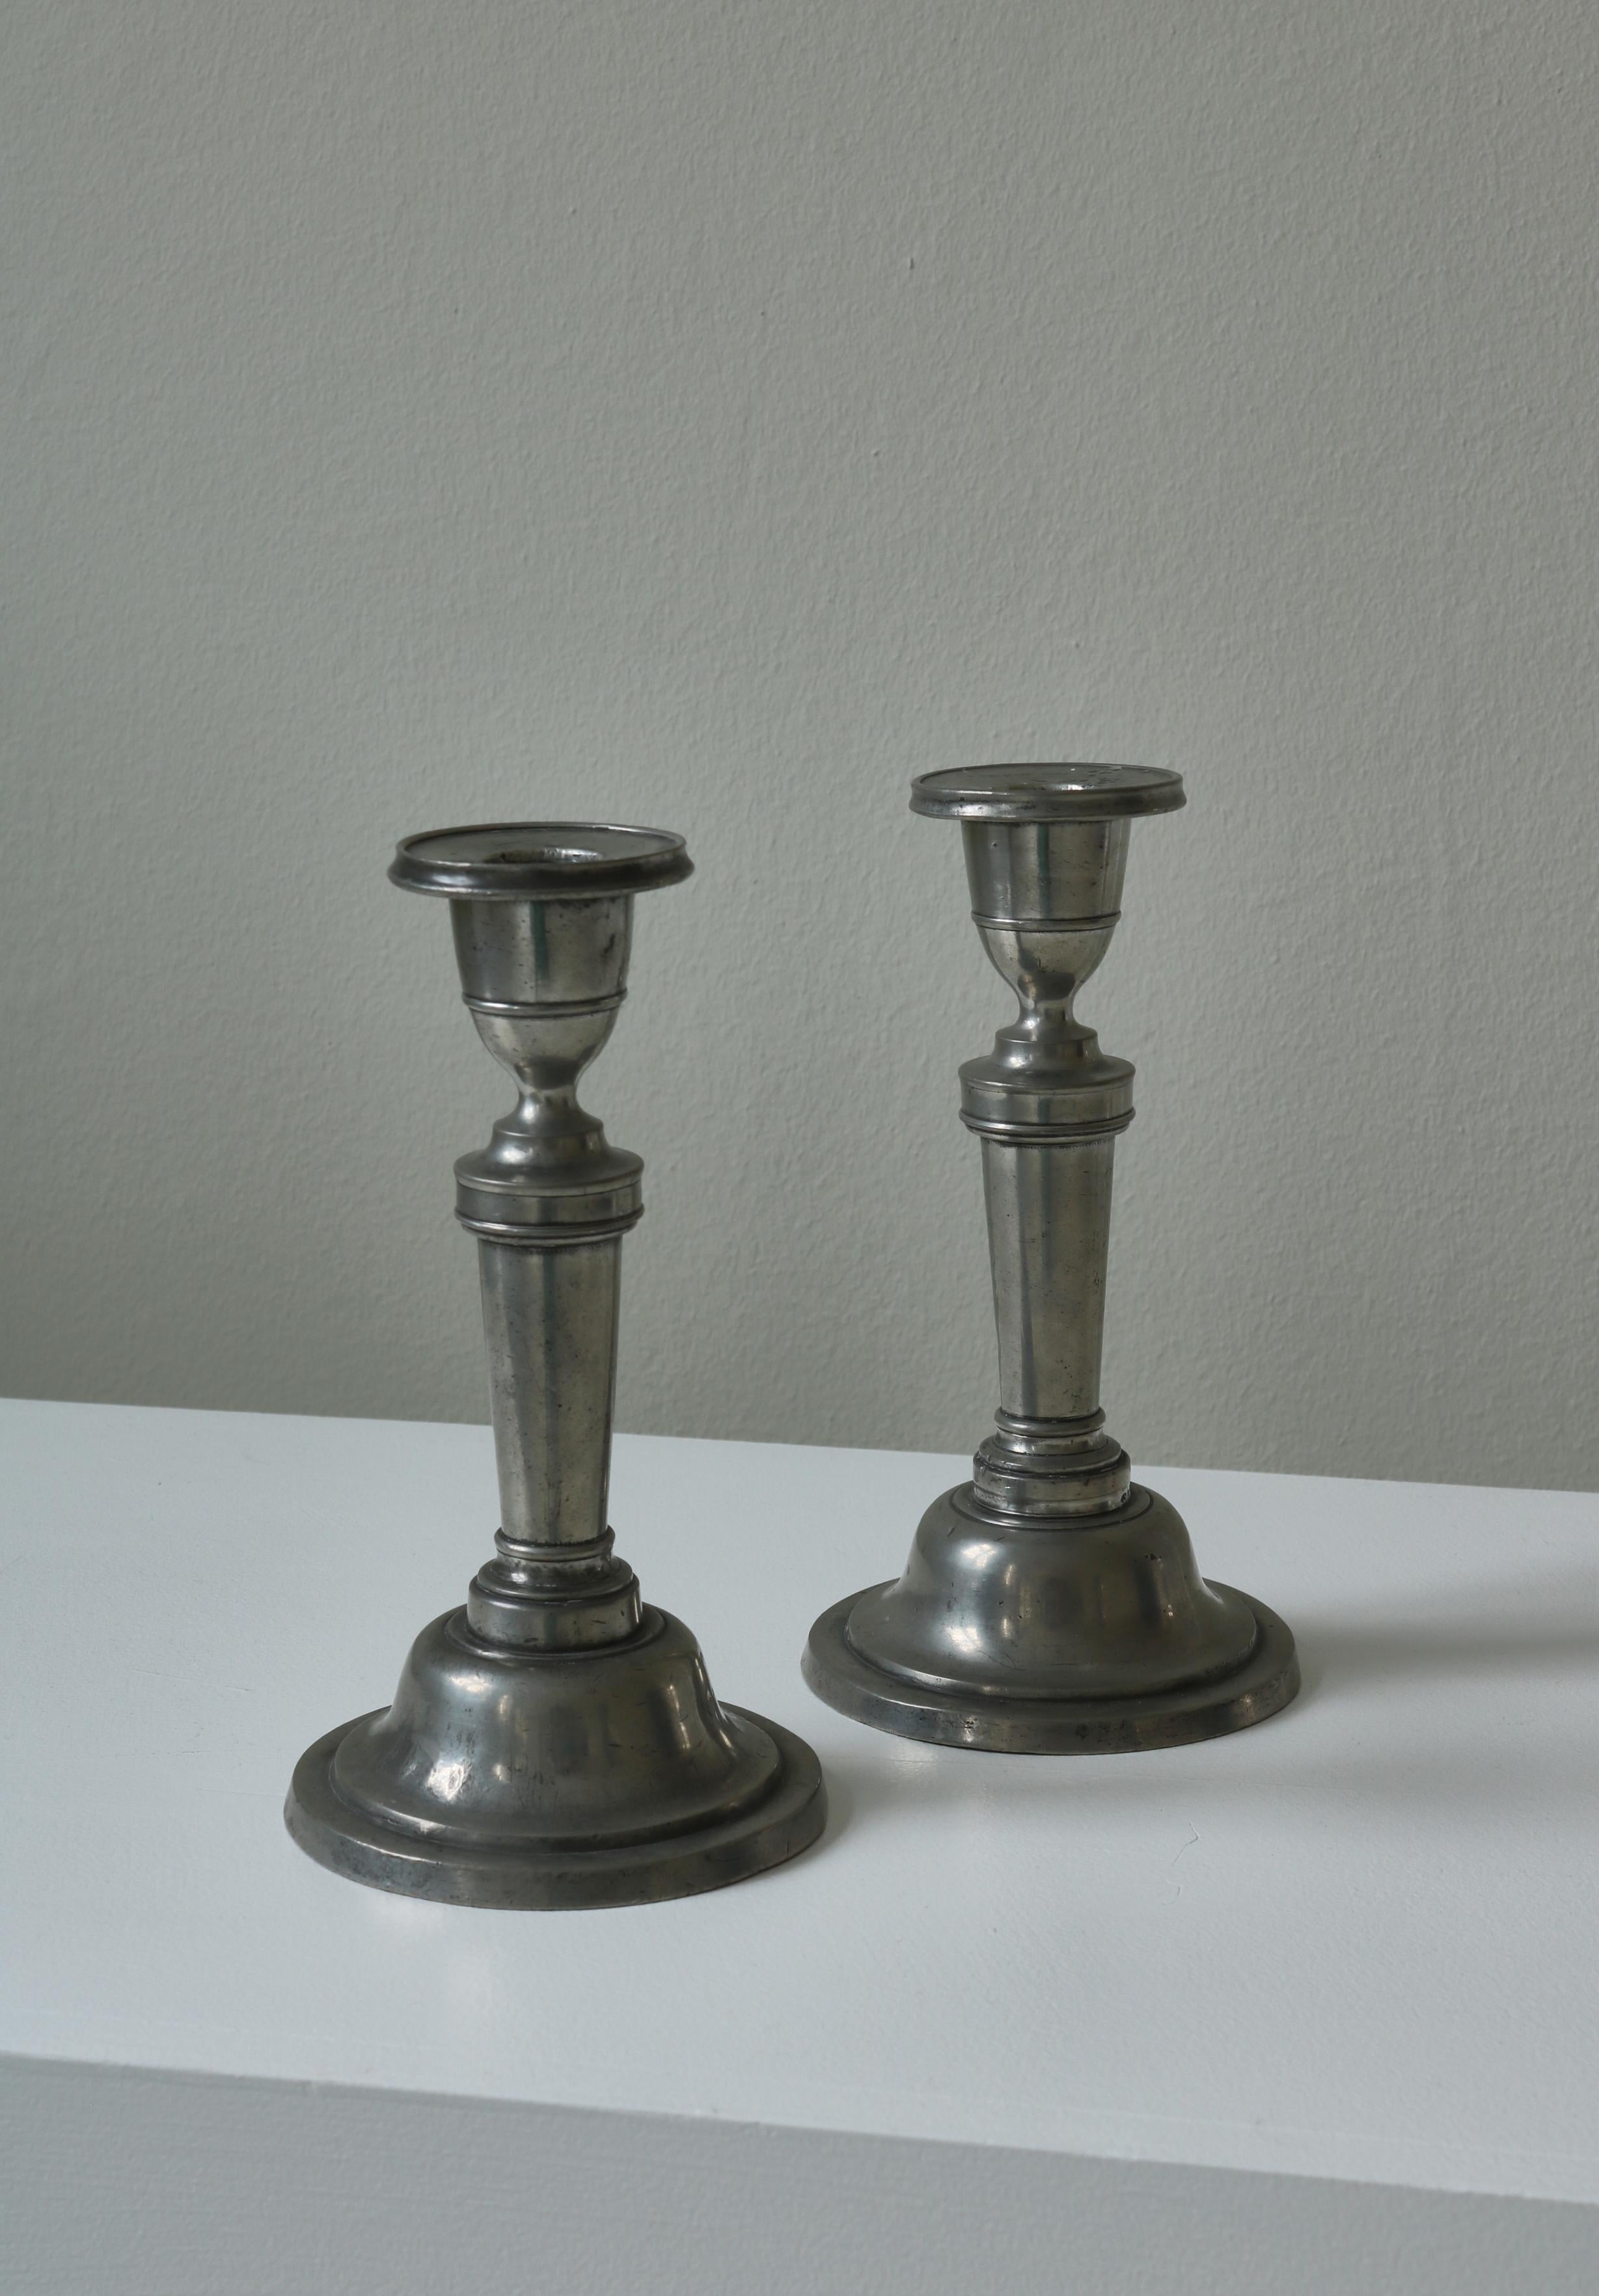 Handmade Antique Empire Candle Holders in Pewter, Stamped, Denmark, 19th Century 2